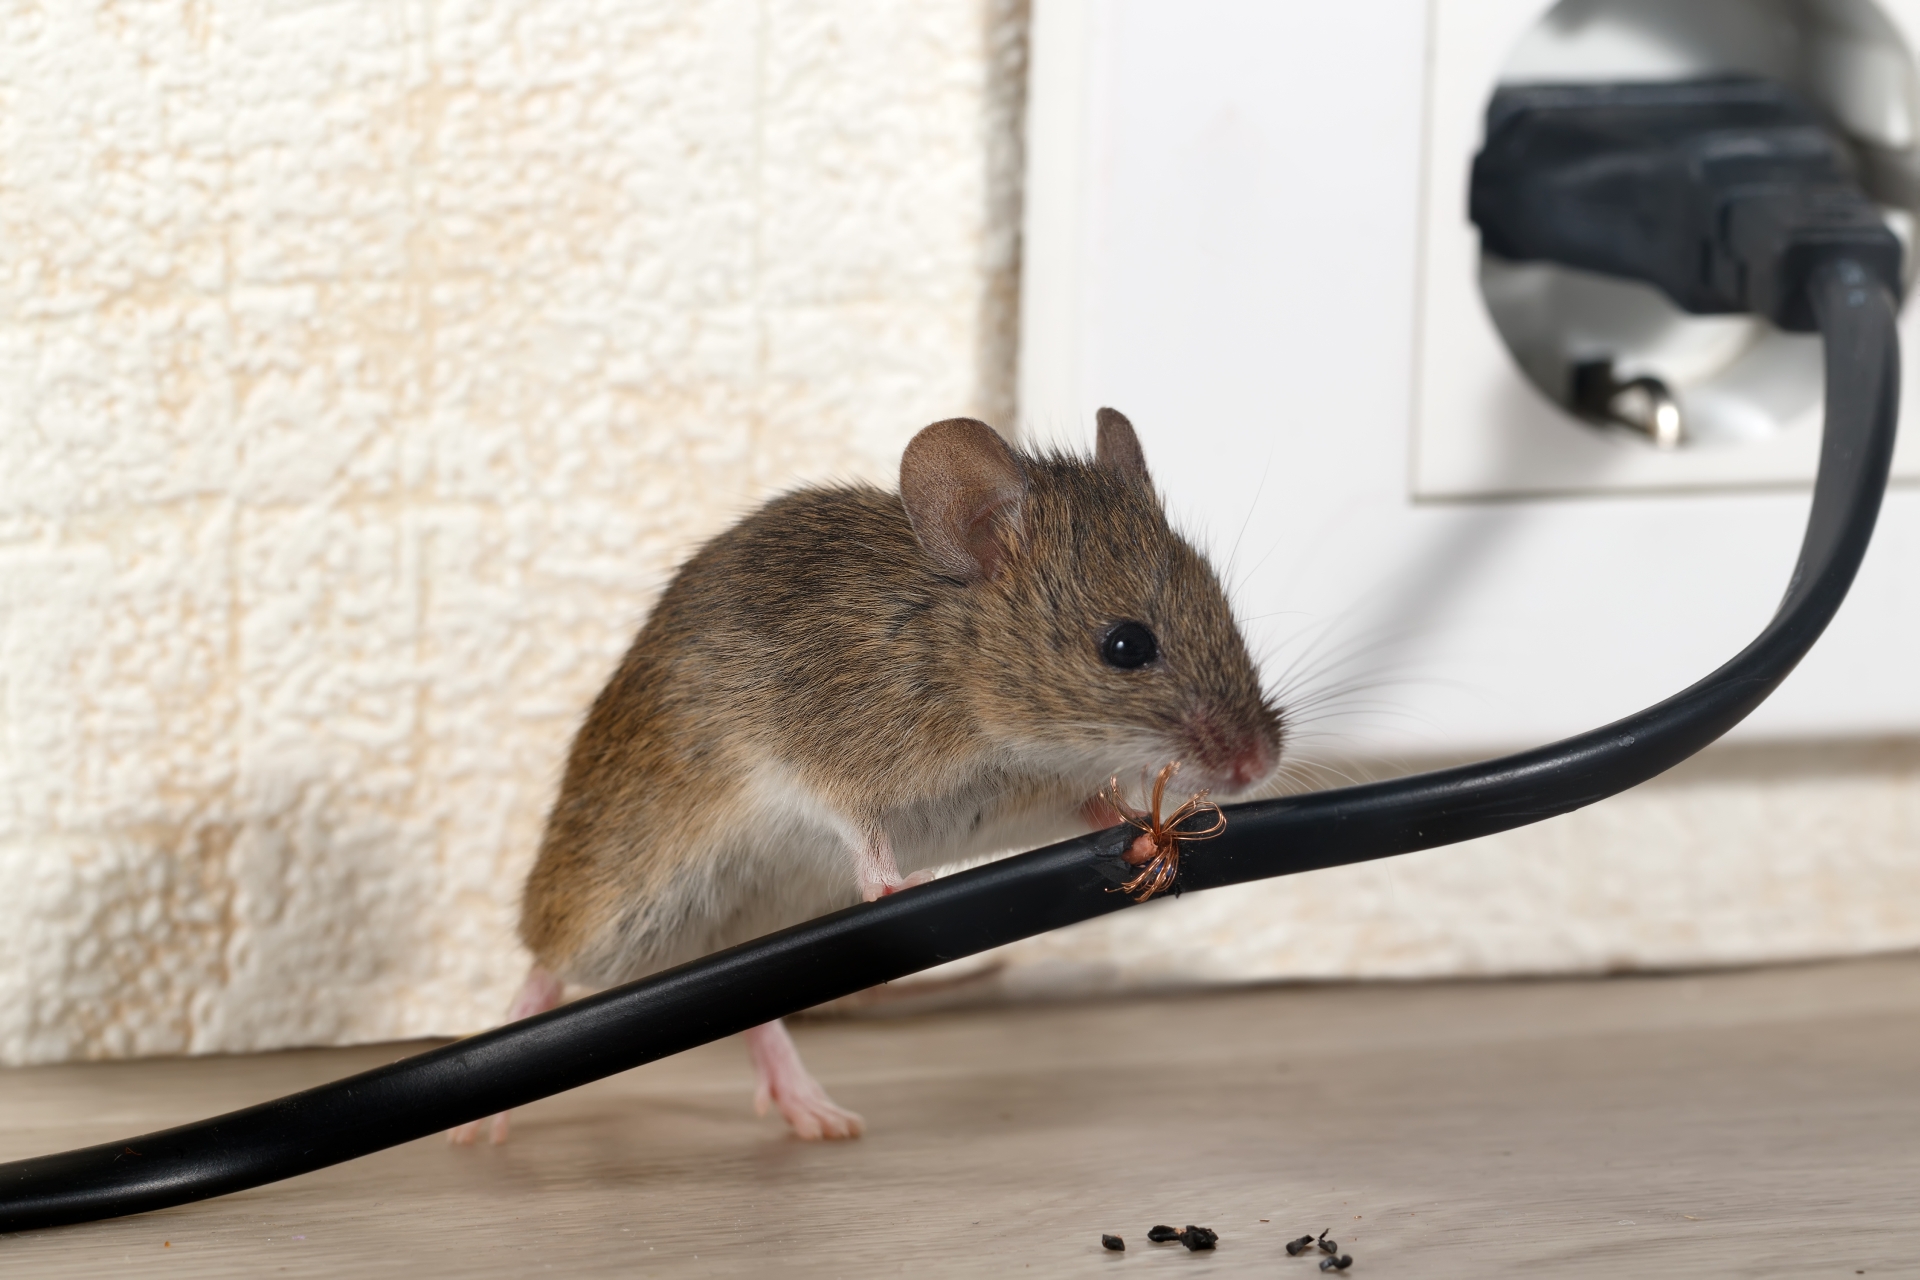 Mice Infestation, Pest Control in Harlesden, Willesden, NW10. Call Now 020 8166 9746